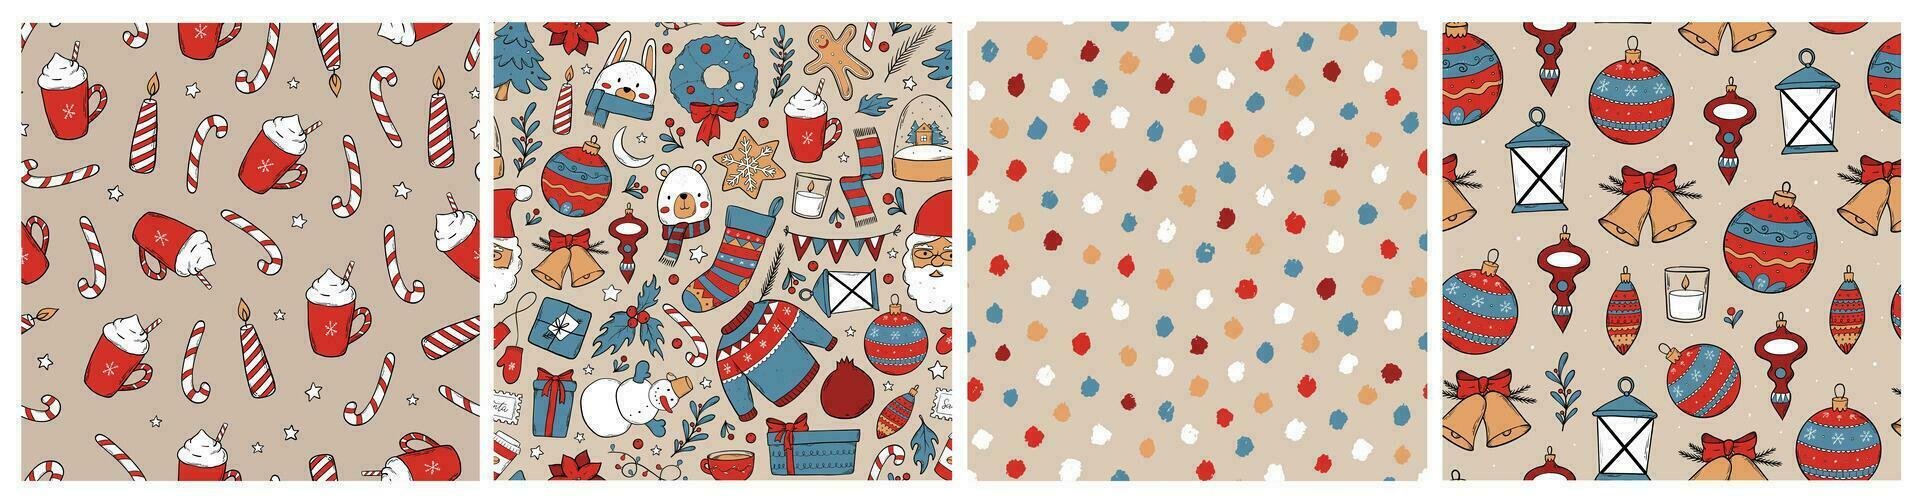 set of 4 seamless Christmas patterns decorated with doodles for wallpaper, prints, wrapping paper, scrapbooking, stationary, textile, gift wrap, packaging, etc. EPS 10 vector